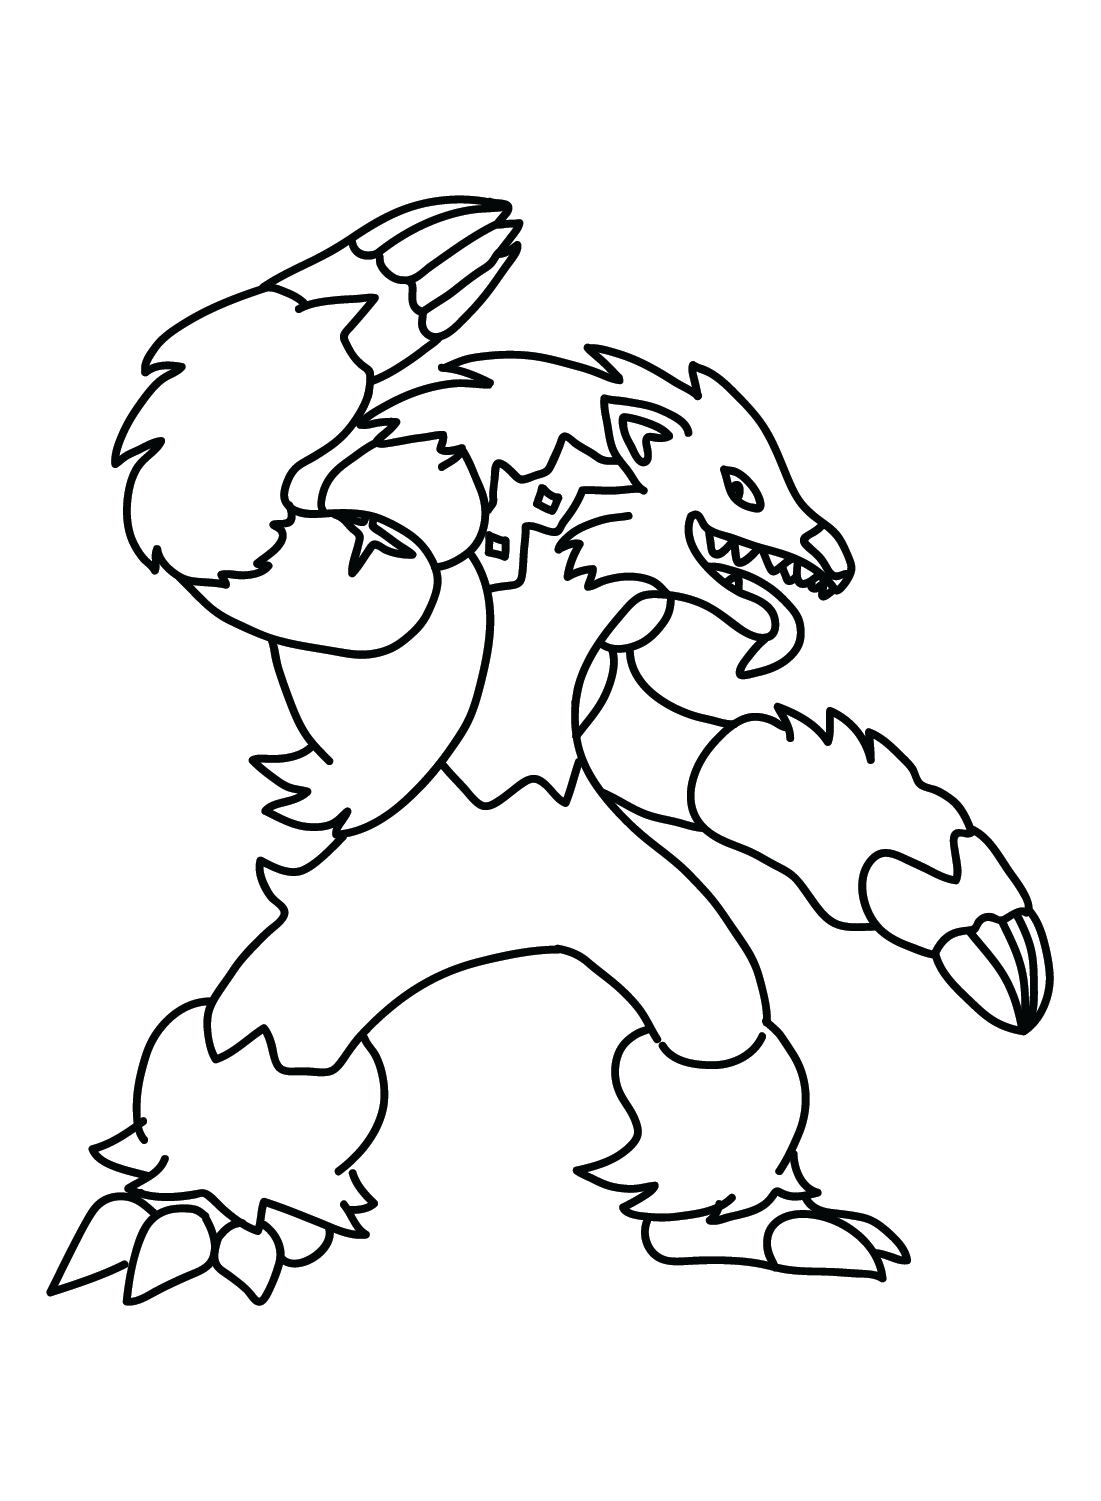 The Obstagoon Pokemon Coloring Page